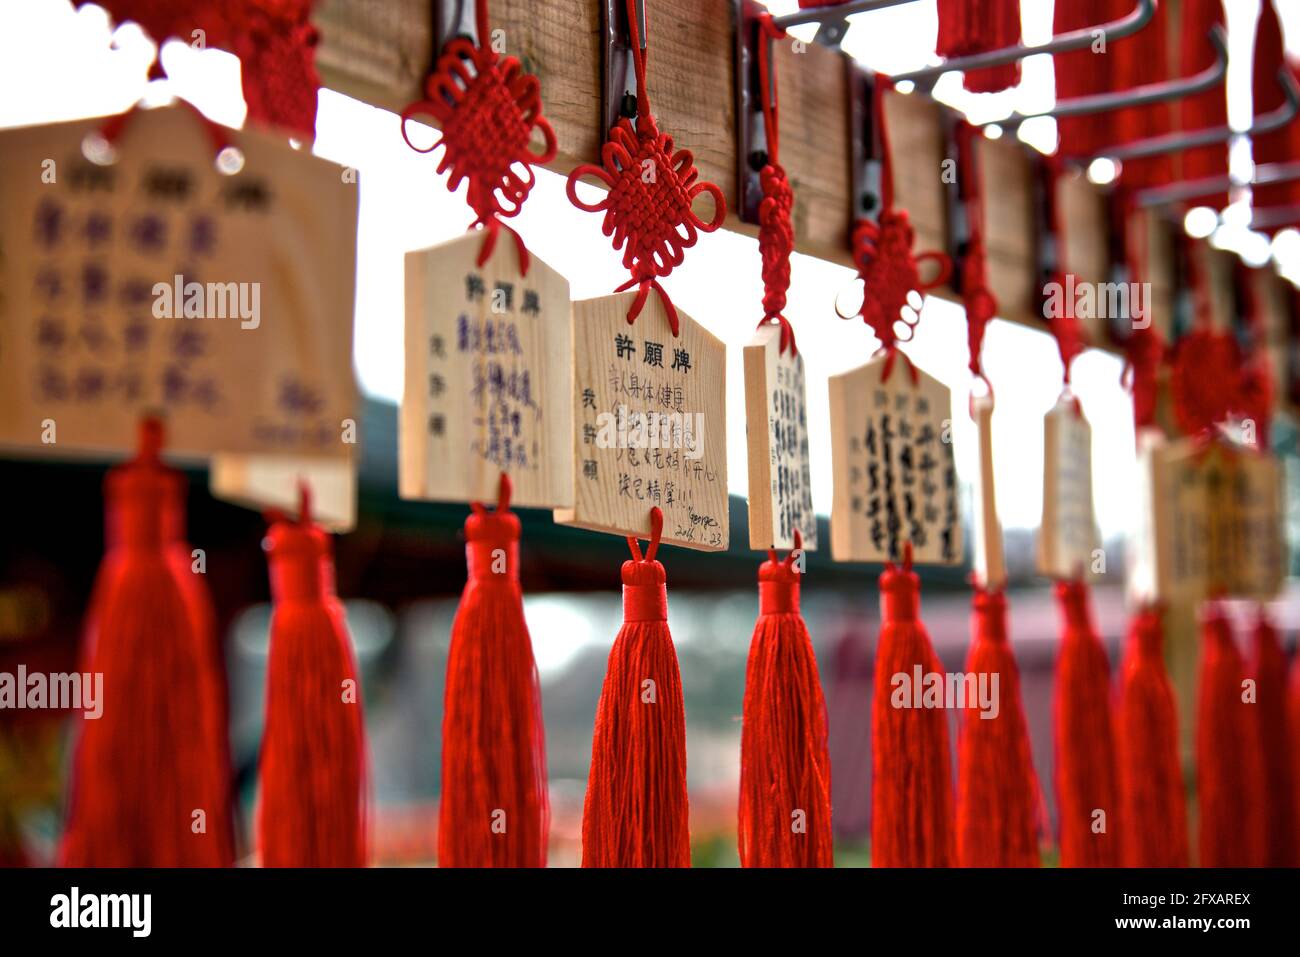 Close up of wooden plaques bearing prayers or wishes hanging up at the Buddhist temple in Toronto, Ontario, Canada Stock Photo